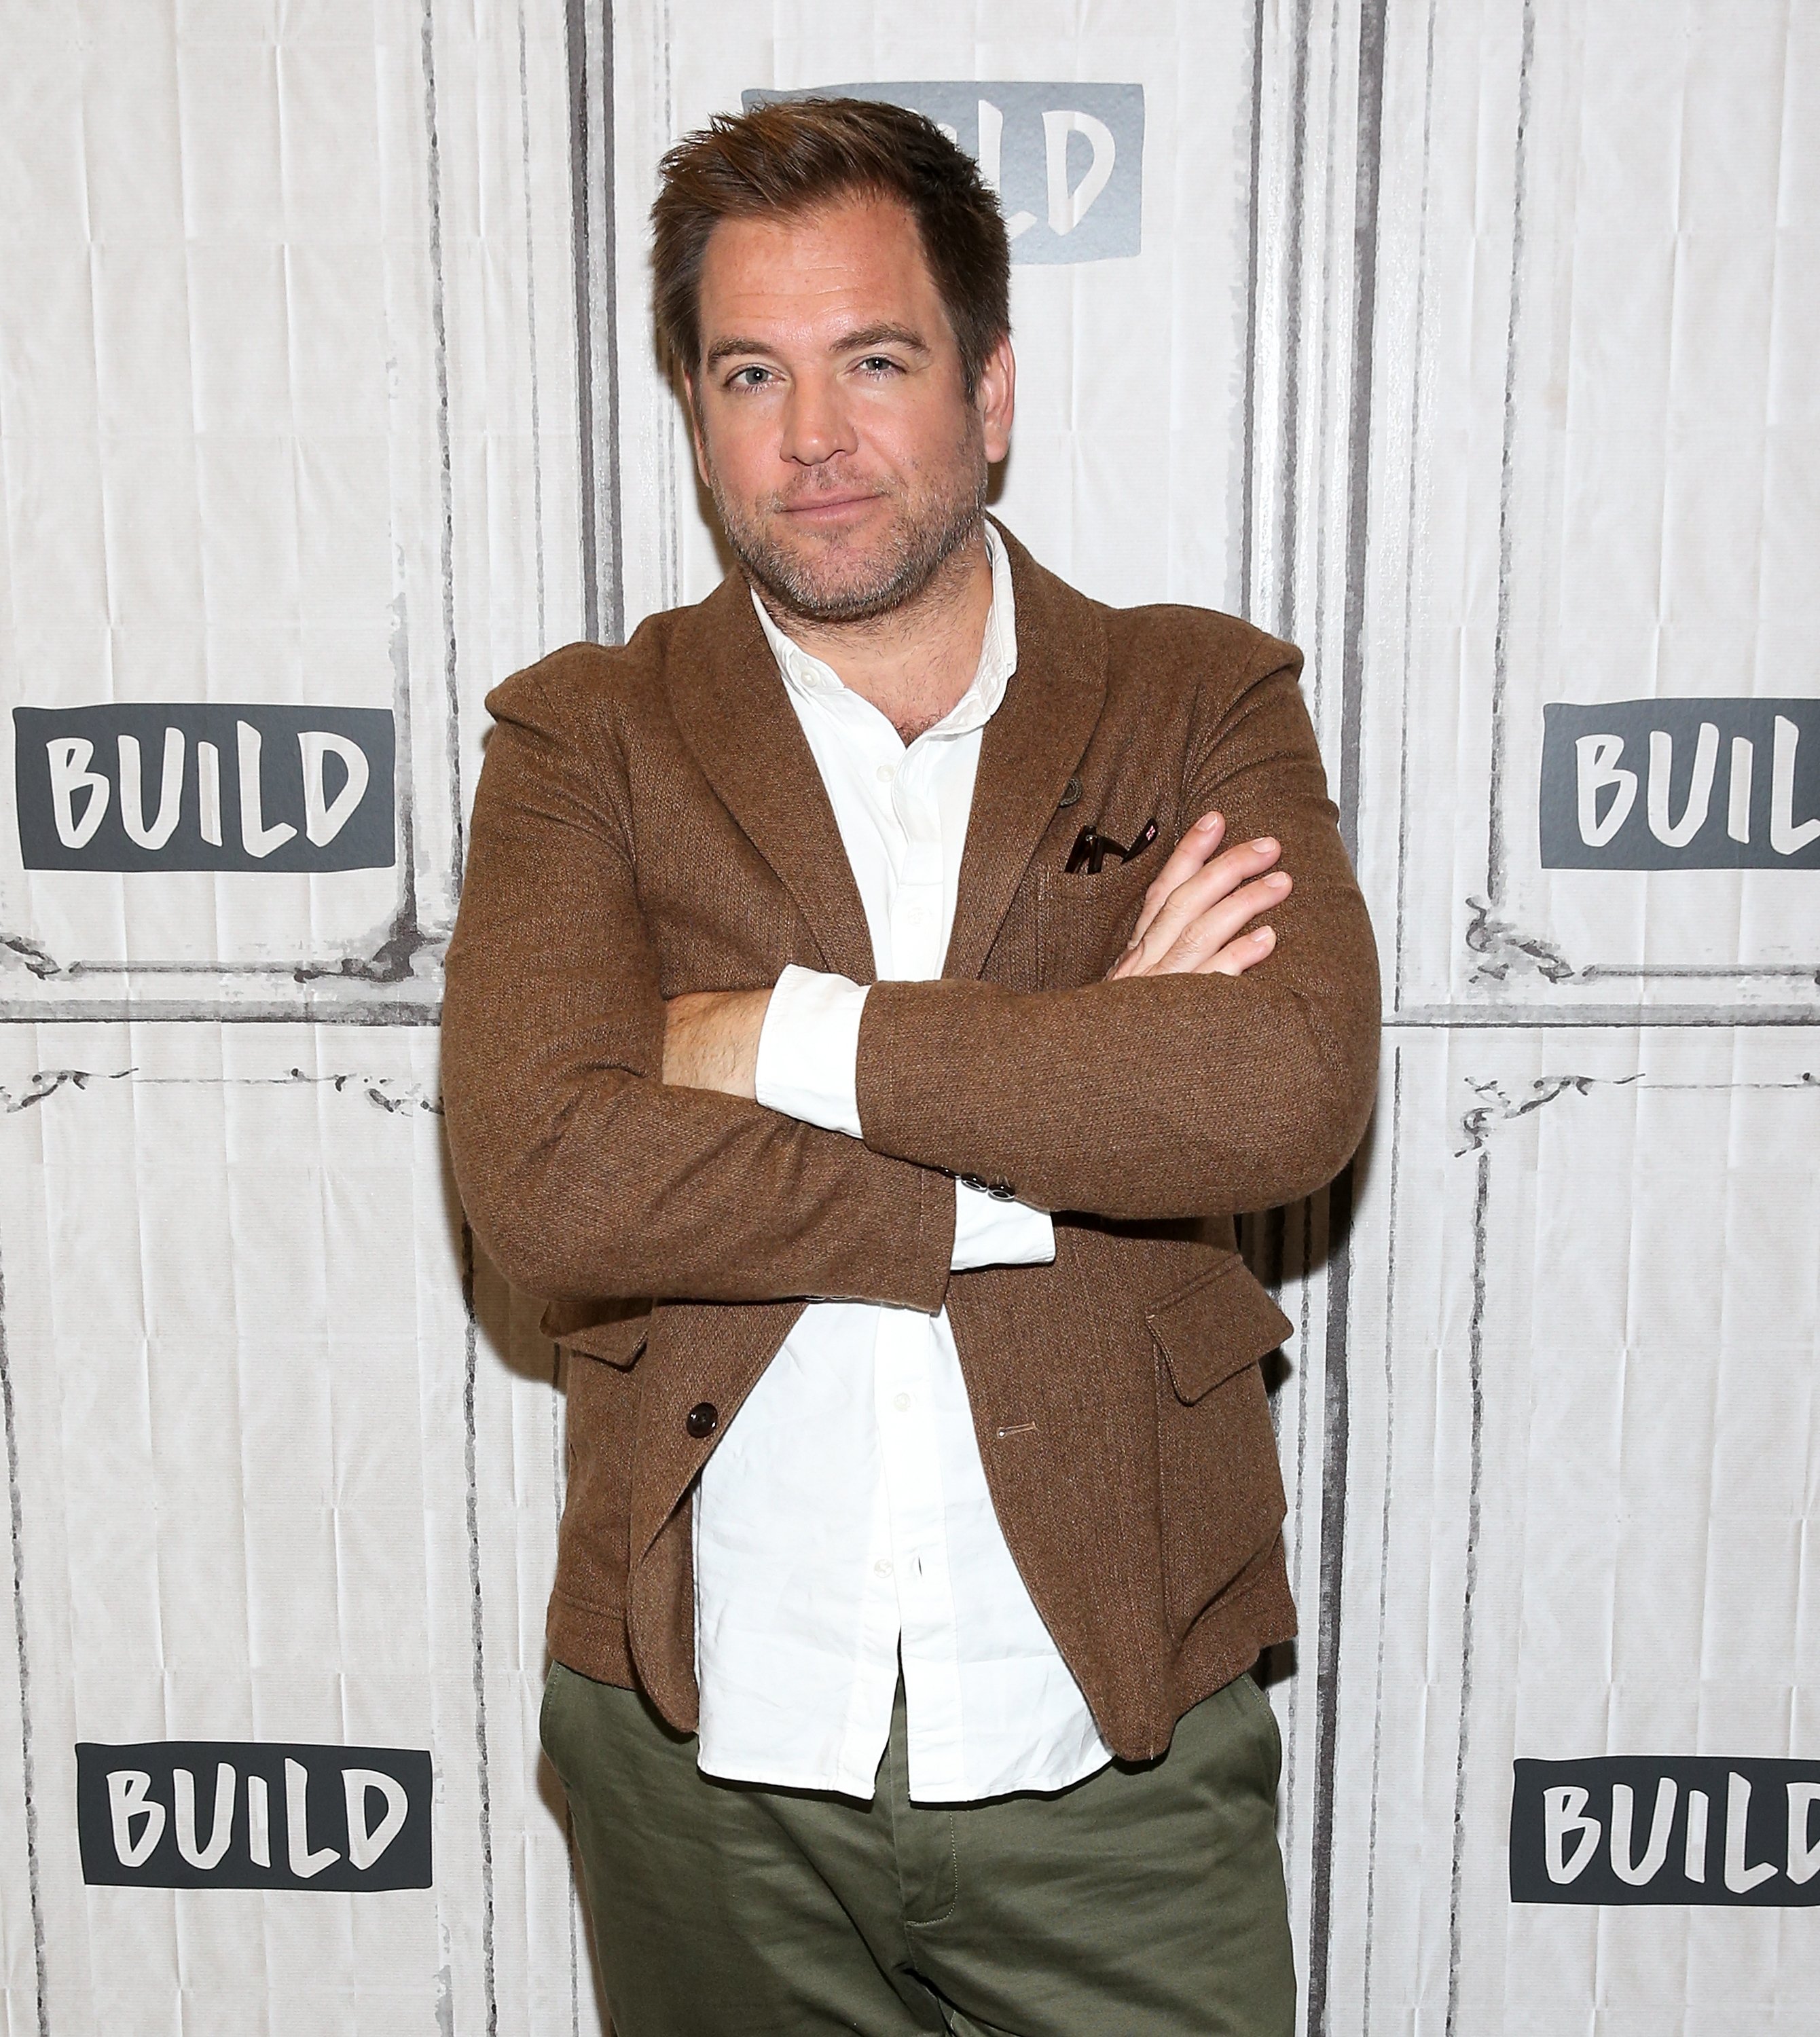 Michael Weatherly visits Build to discuss "Bull" at Build Studio on September 26, 2017. | Source: Getty Images